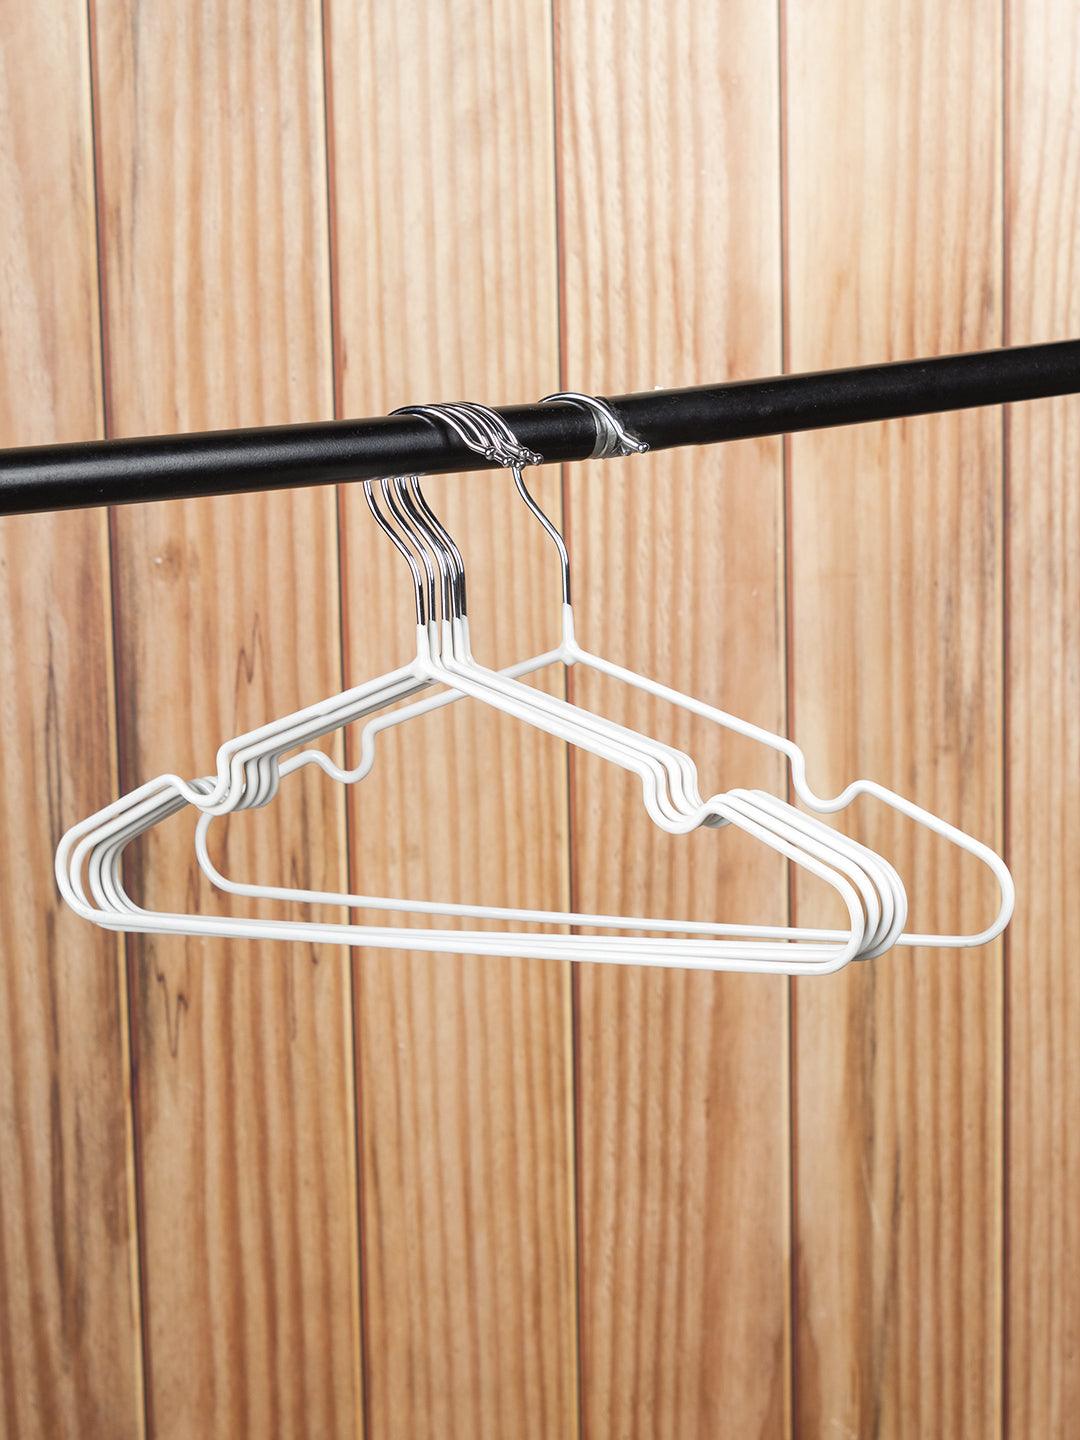 Clothes Hangers, Natural Wood Hangers, with Metal Hook, Standard Hangers,  Natural & Mahogany Colour, Wood, Set of 12 - MARKET99